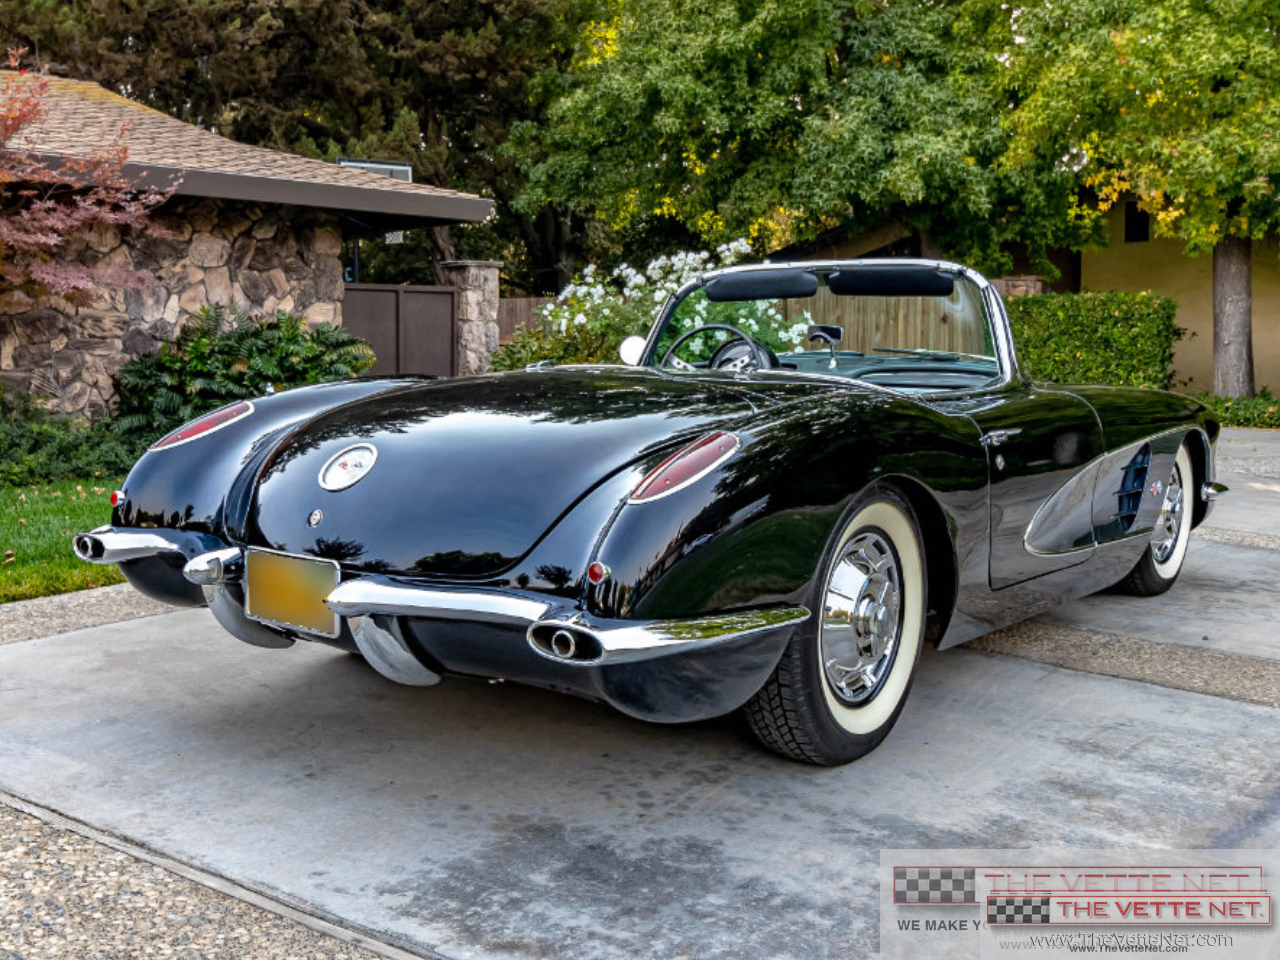 1959 Corvette Convertible Black with Gray Coves